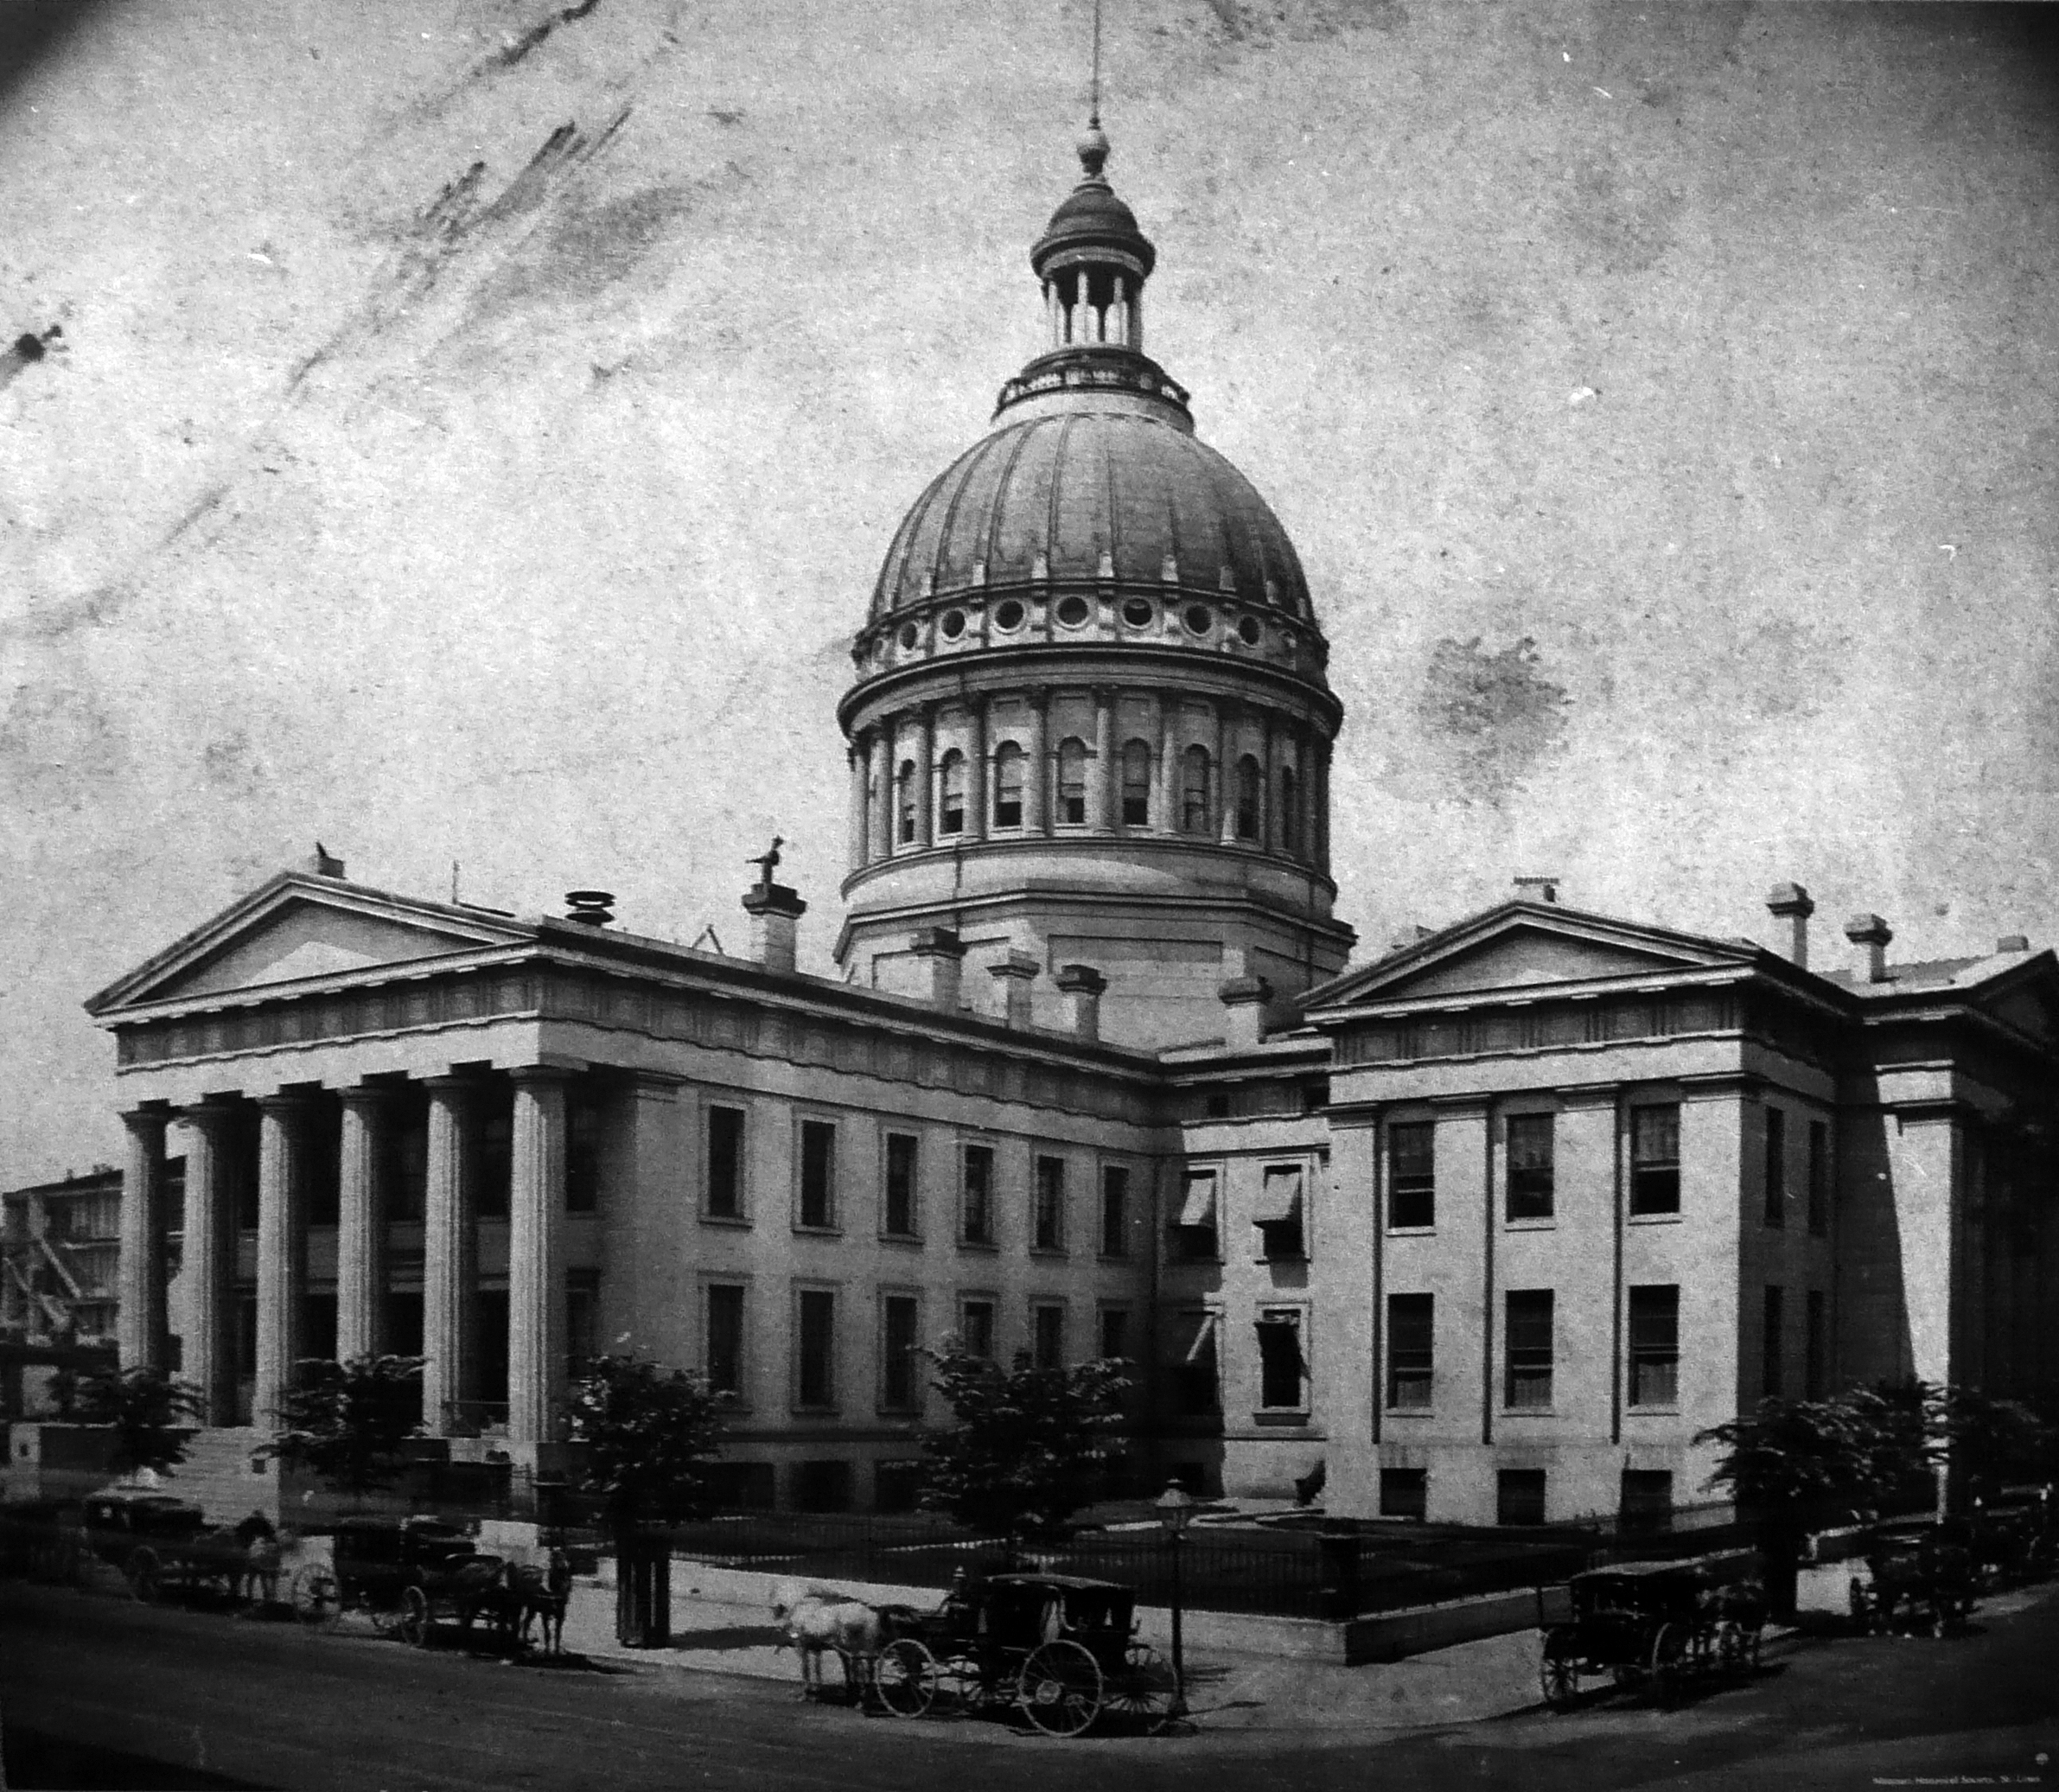 St. Louis, MO Old Courthouse in 1862 (3400916133)